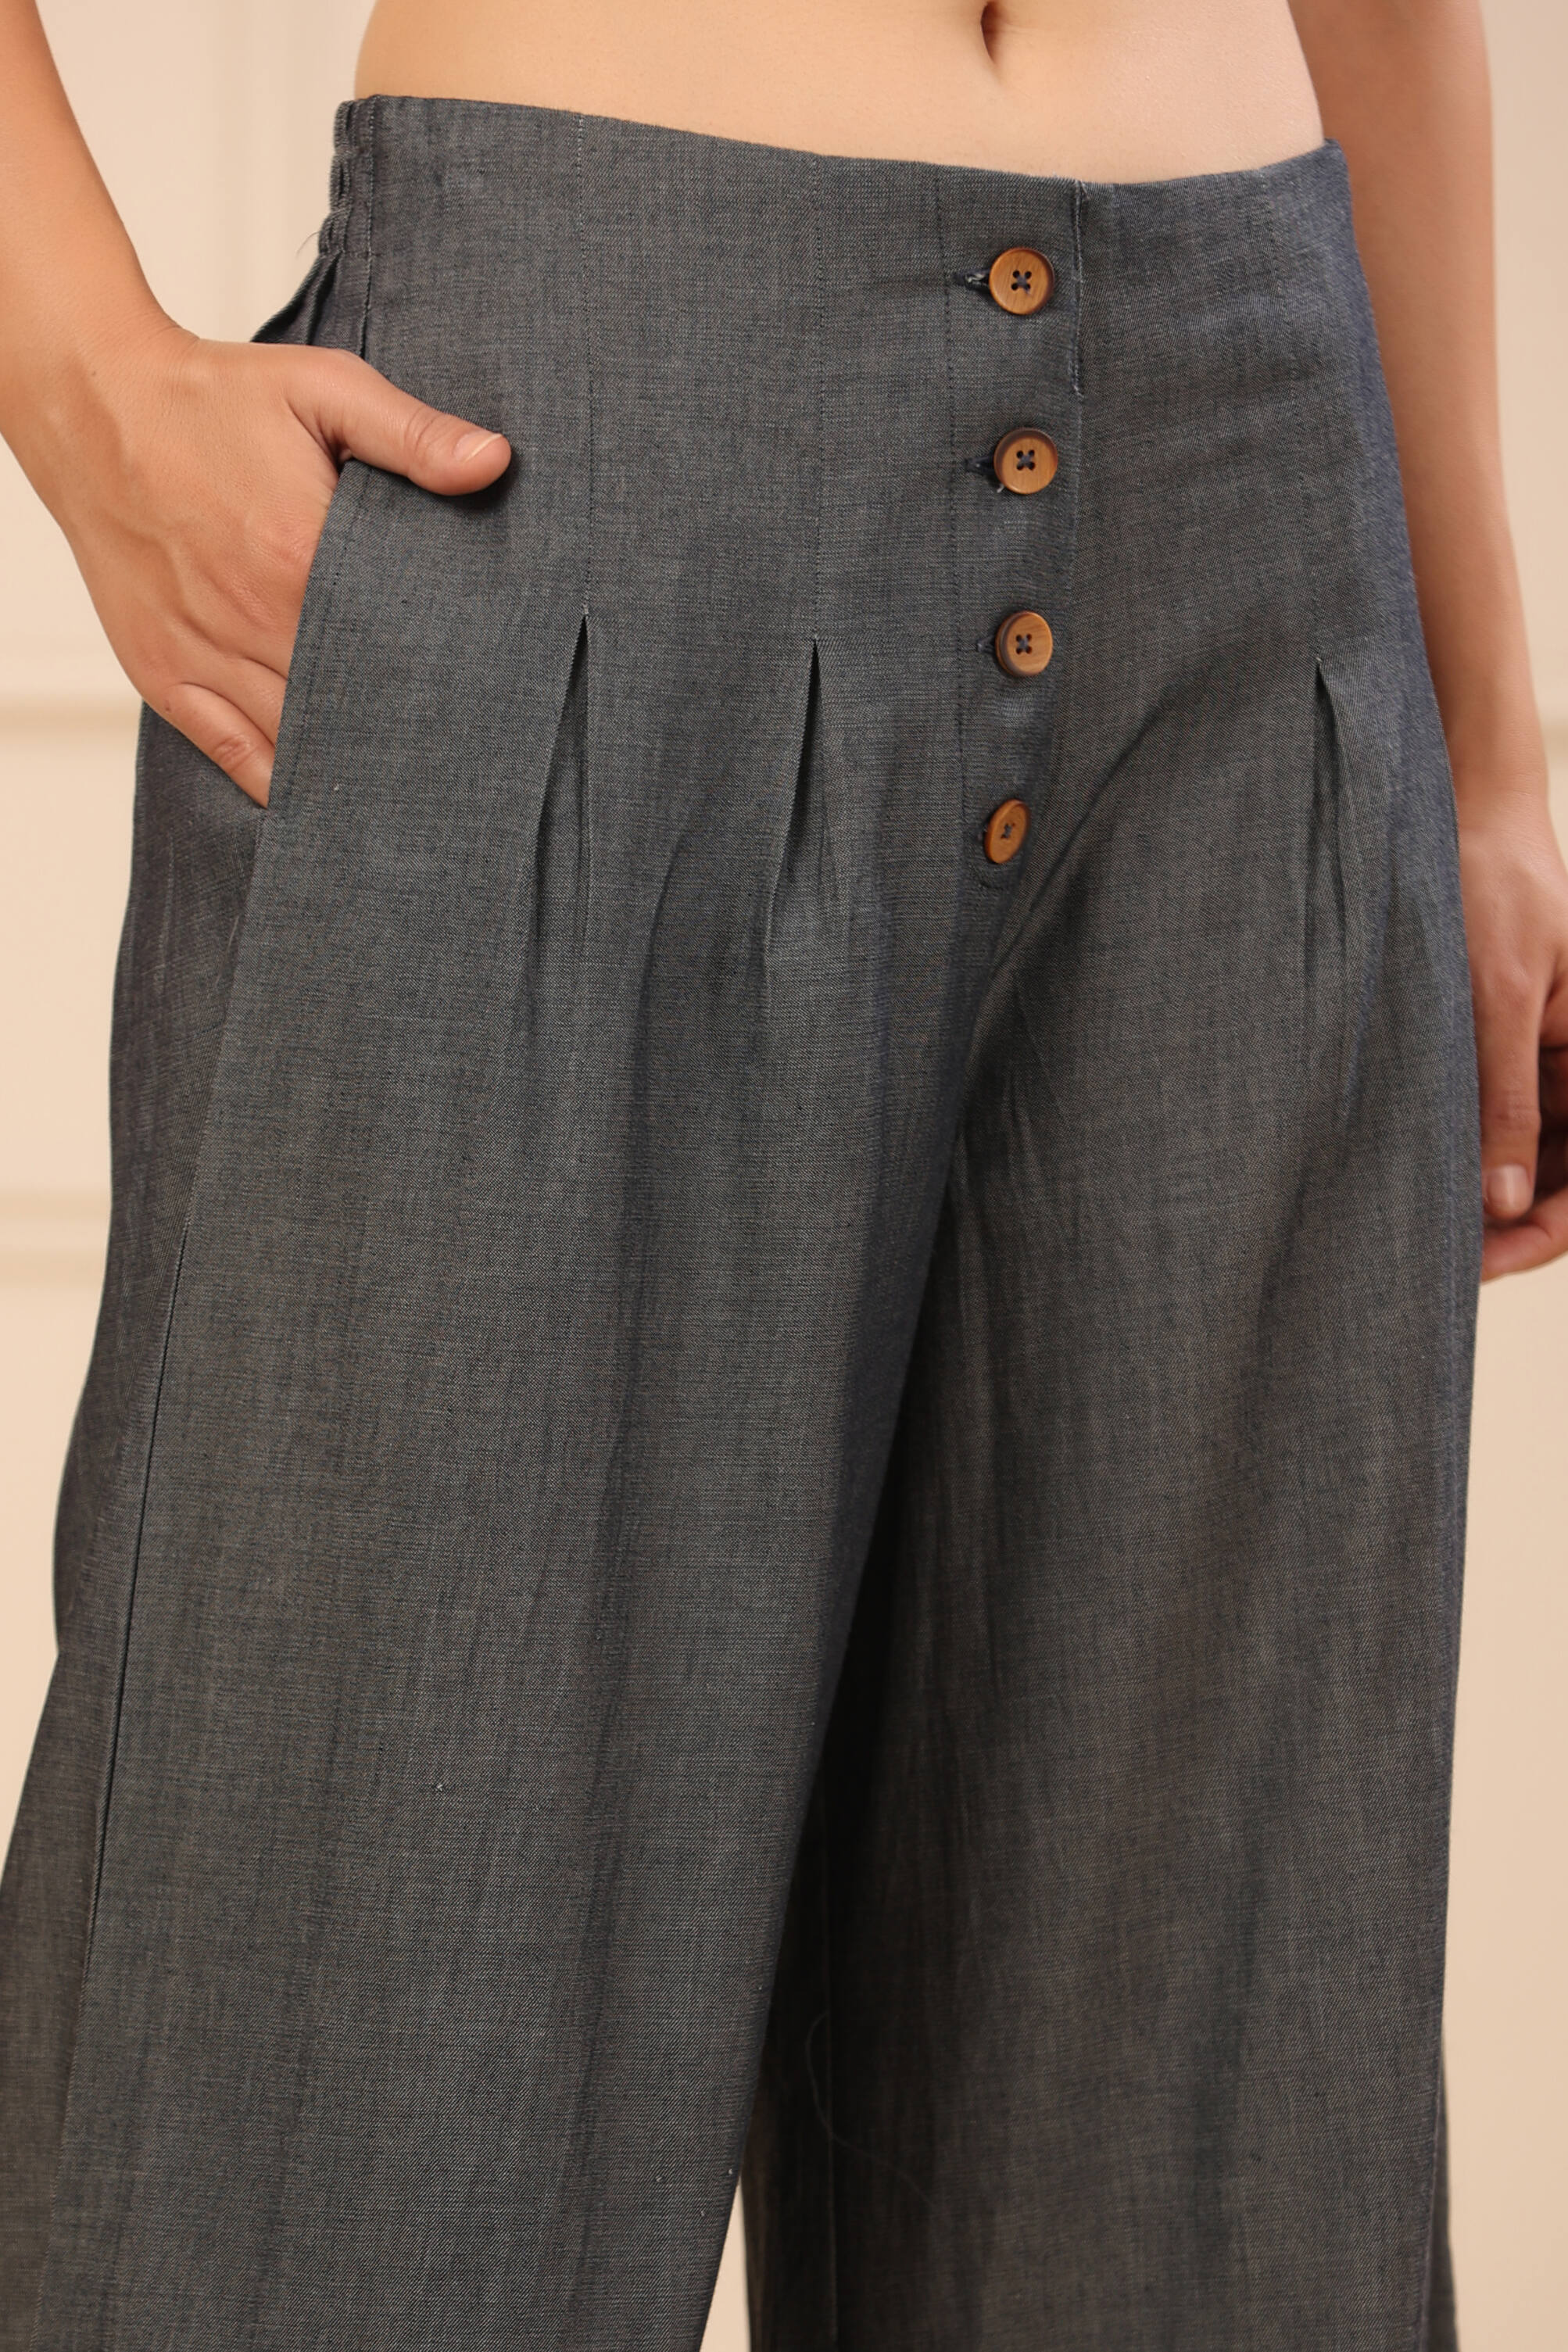 Women's Trousers - Buy Women's Trousers Online at Best Price in India |  Suvidha Stores